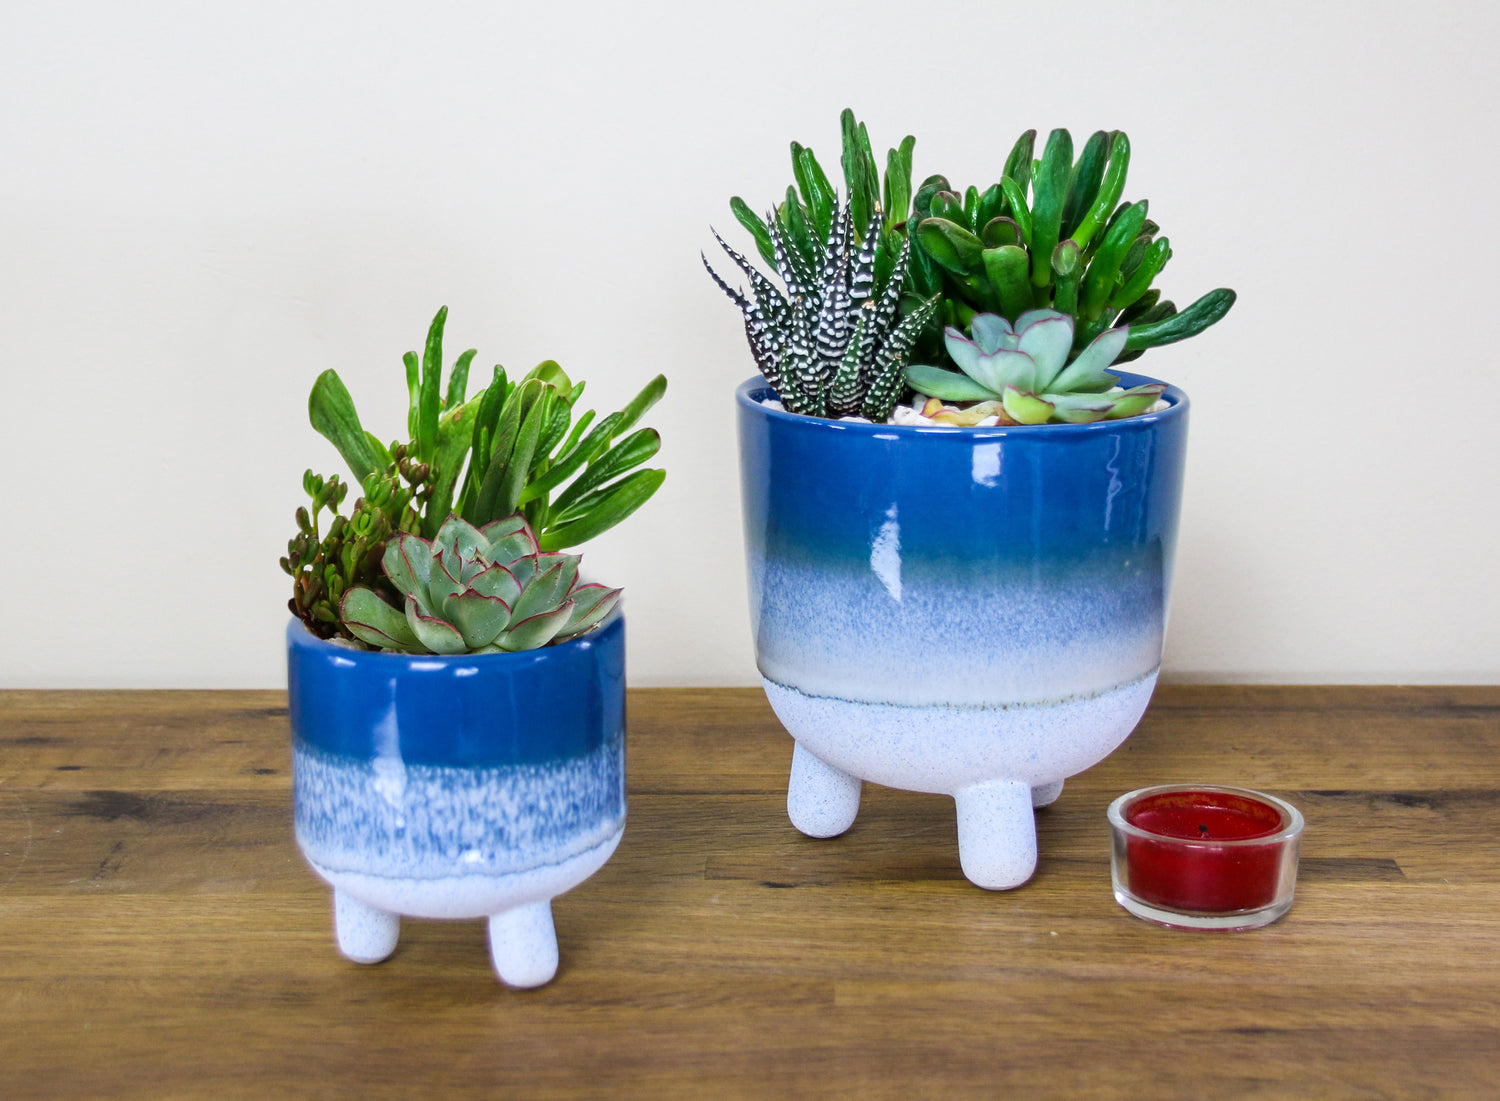 Blue indoor planter kits to order in the UK